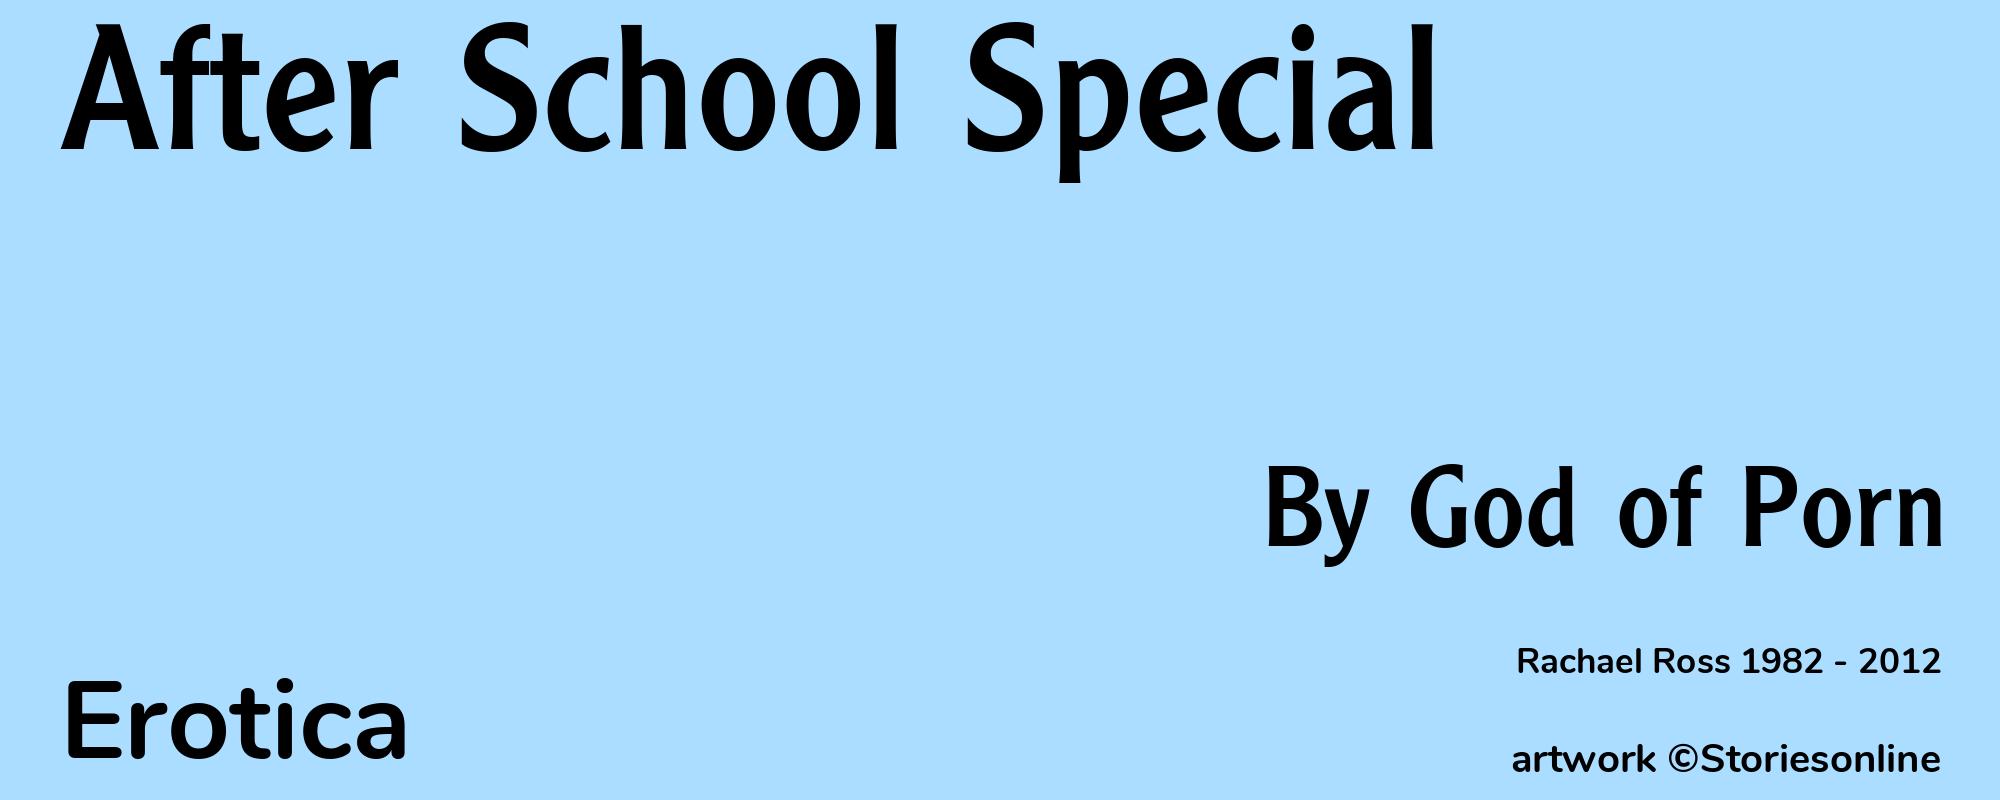 After School Special - Cover